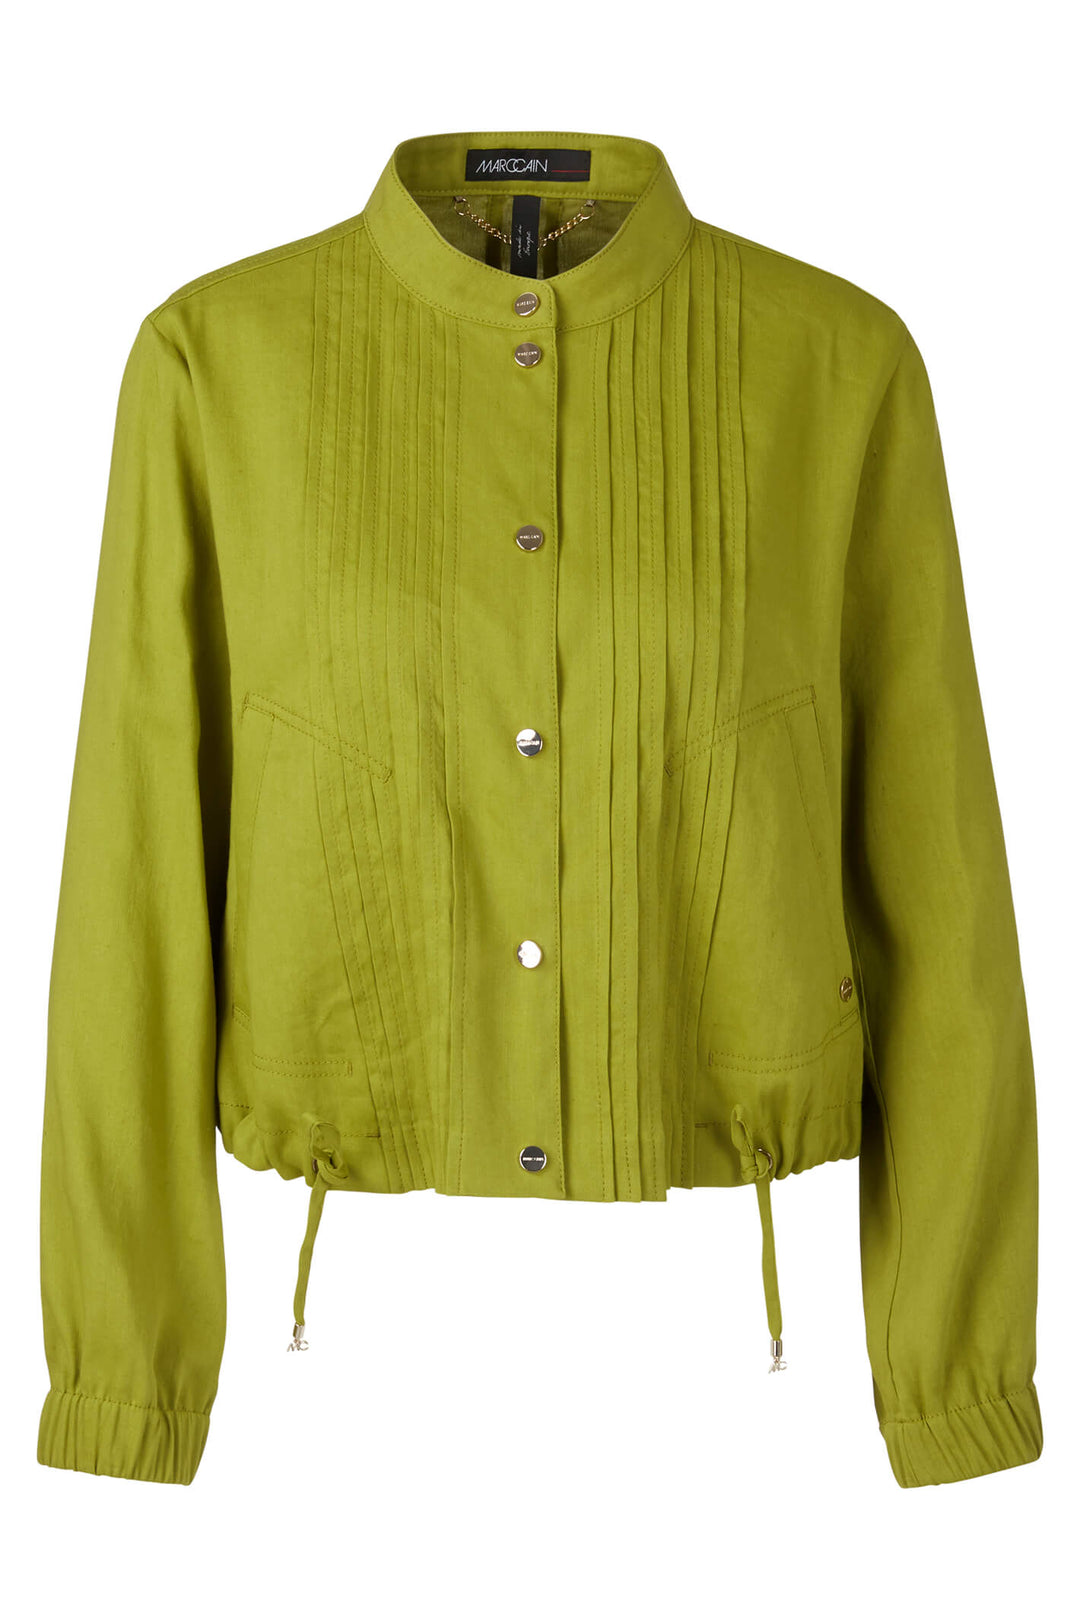 Marc Cain Collection UC 31.24 W47 Green Jacket - Olivia Grace Fashion